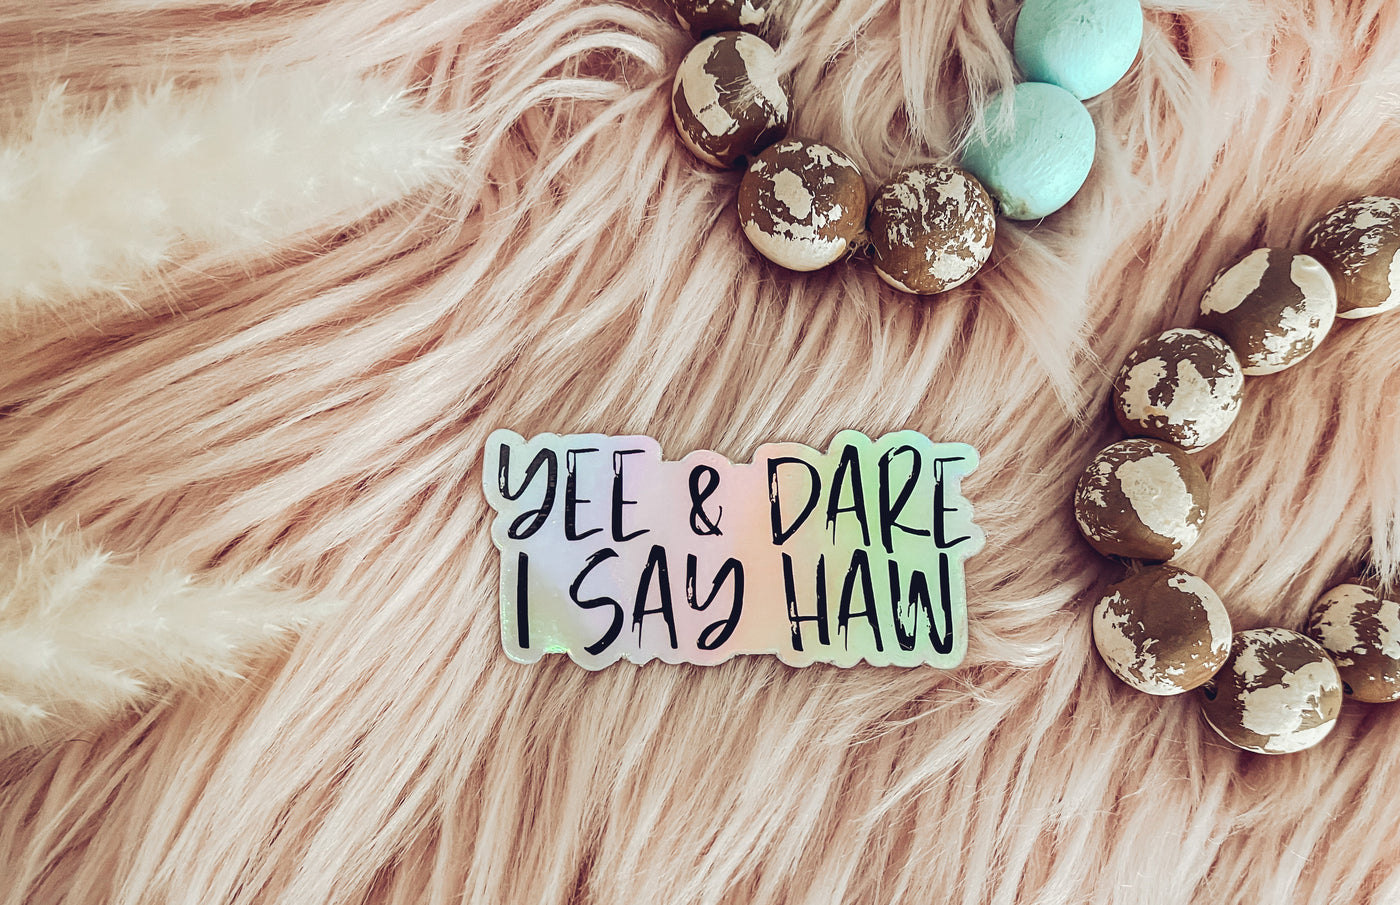 Yee & Dare I Say Haw - Sticker-402 MISC GIFTS-Adelyn Elaine's-Adelyn Elaine's Boutique, Women's Clothing Boutique in Gilmer, TX